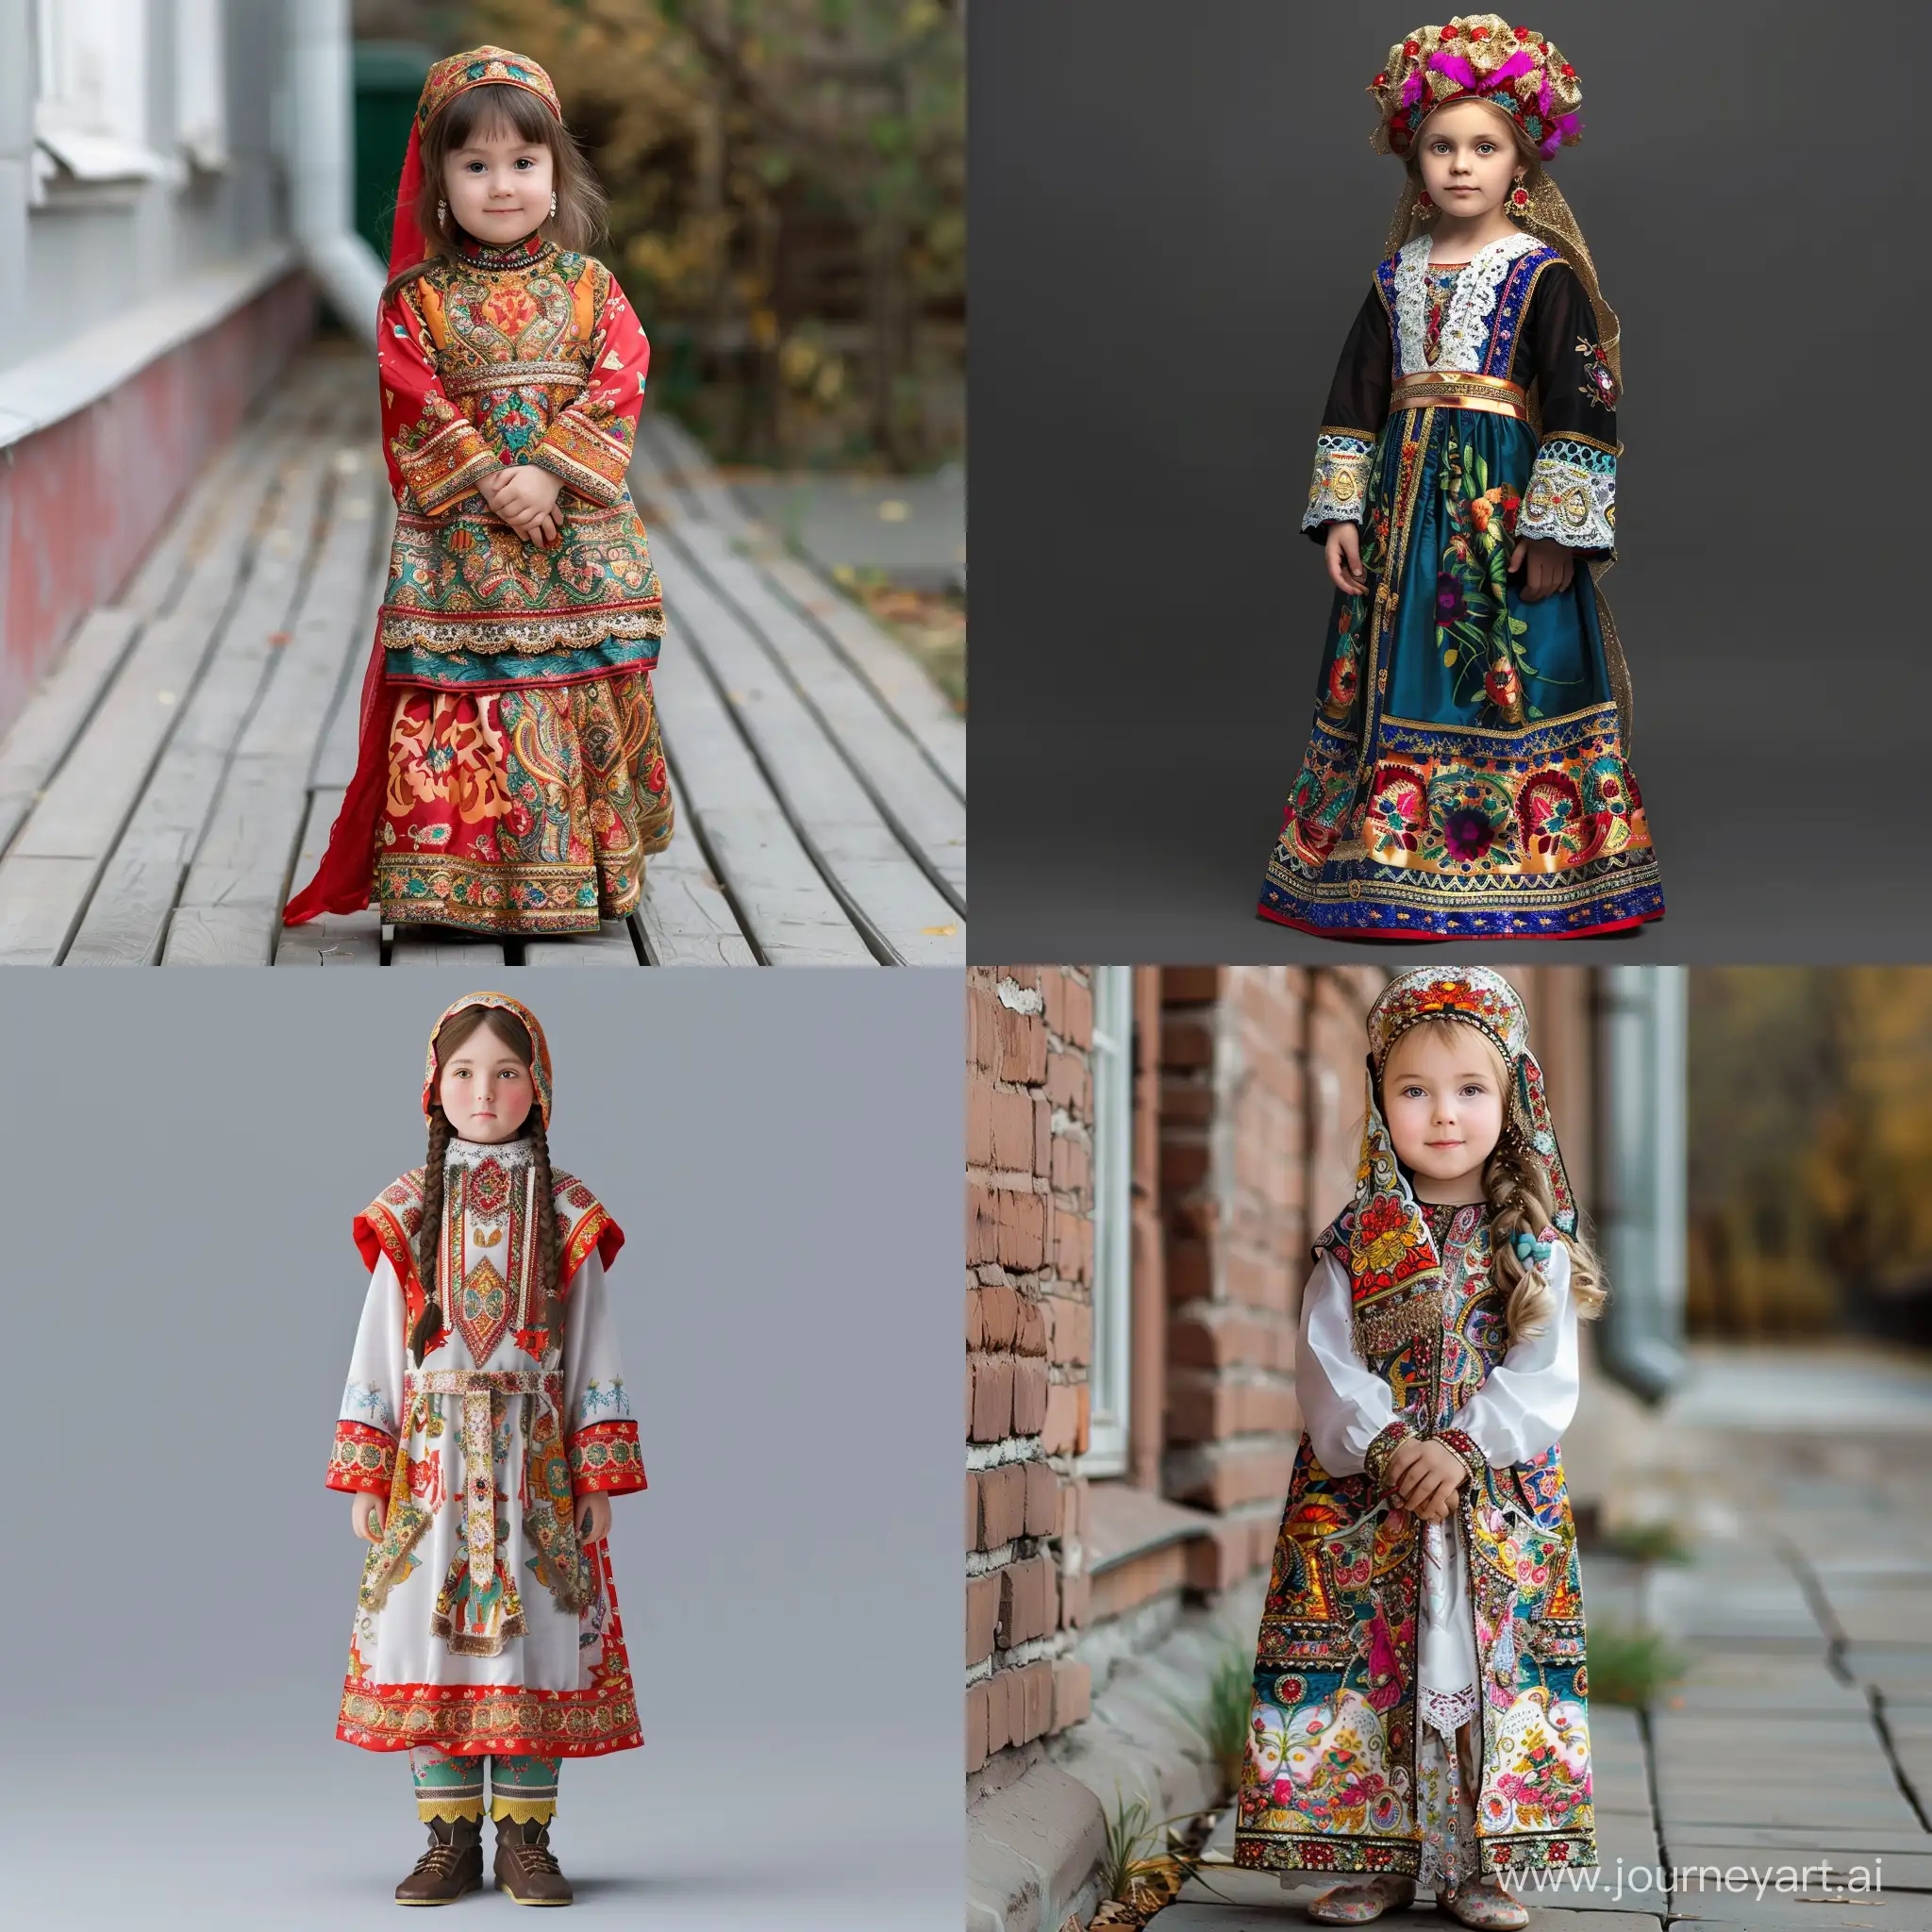 Little-Girl-in-Traditional-Russian-Costume-A-FullLength-Portrait